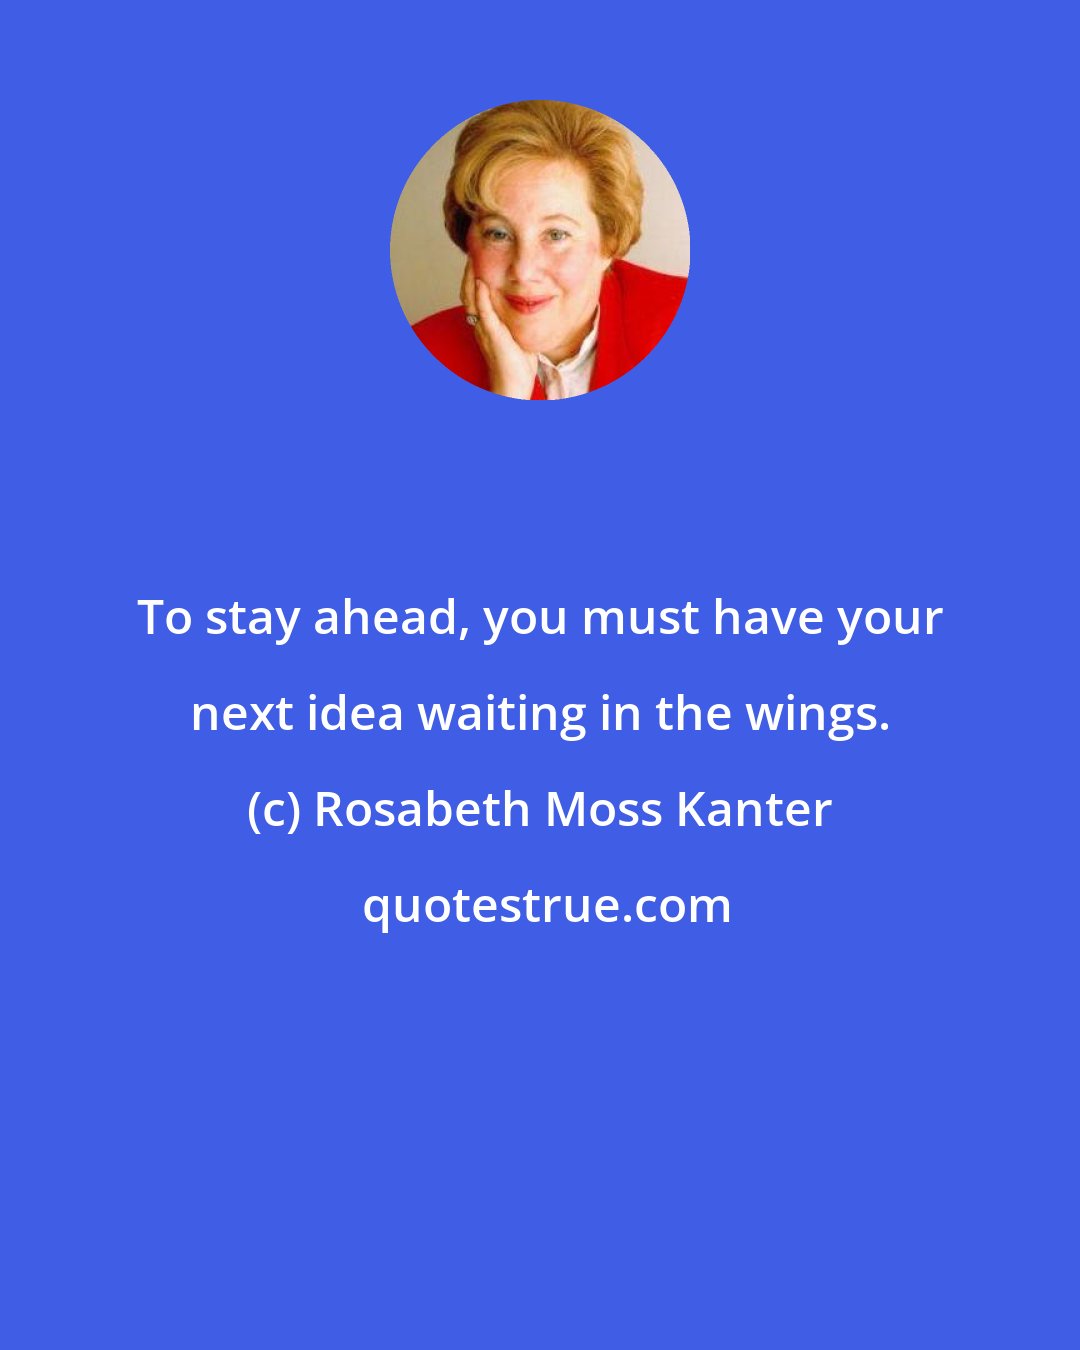 Rosabeth Moss Kanter: To stay ahead, you must have your next idea waiting in the wings.